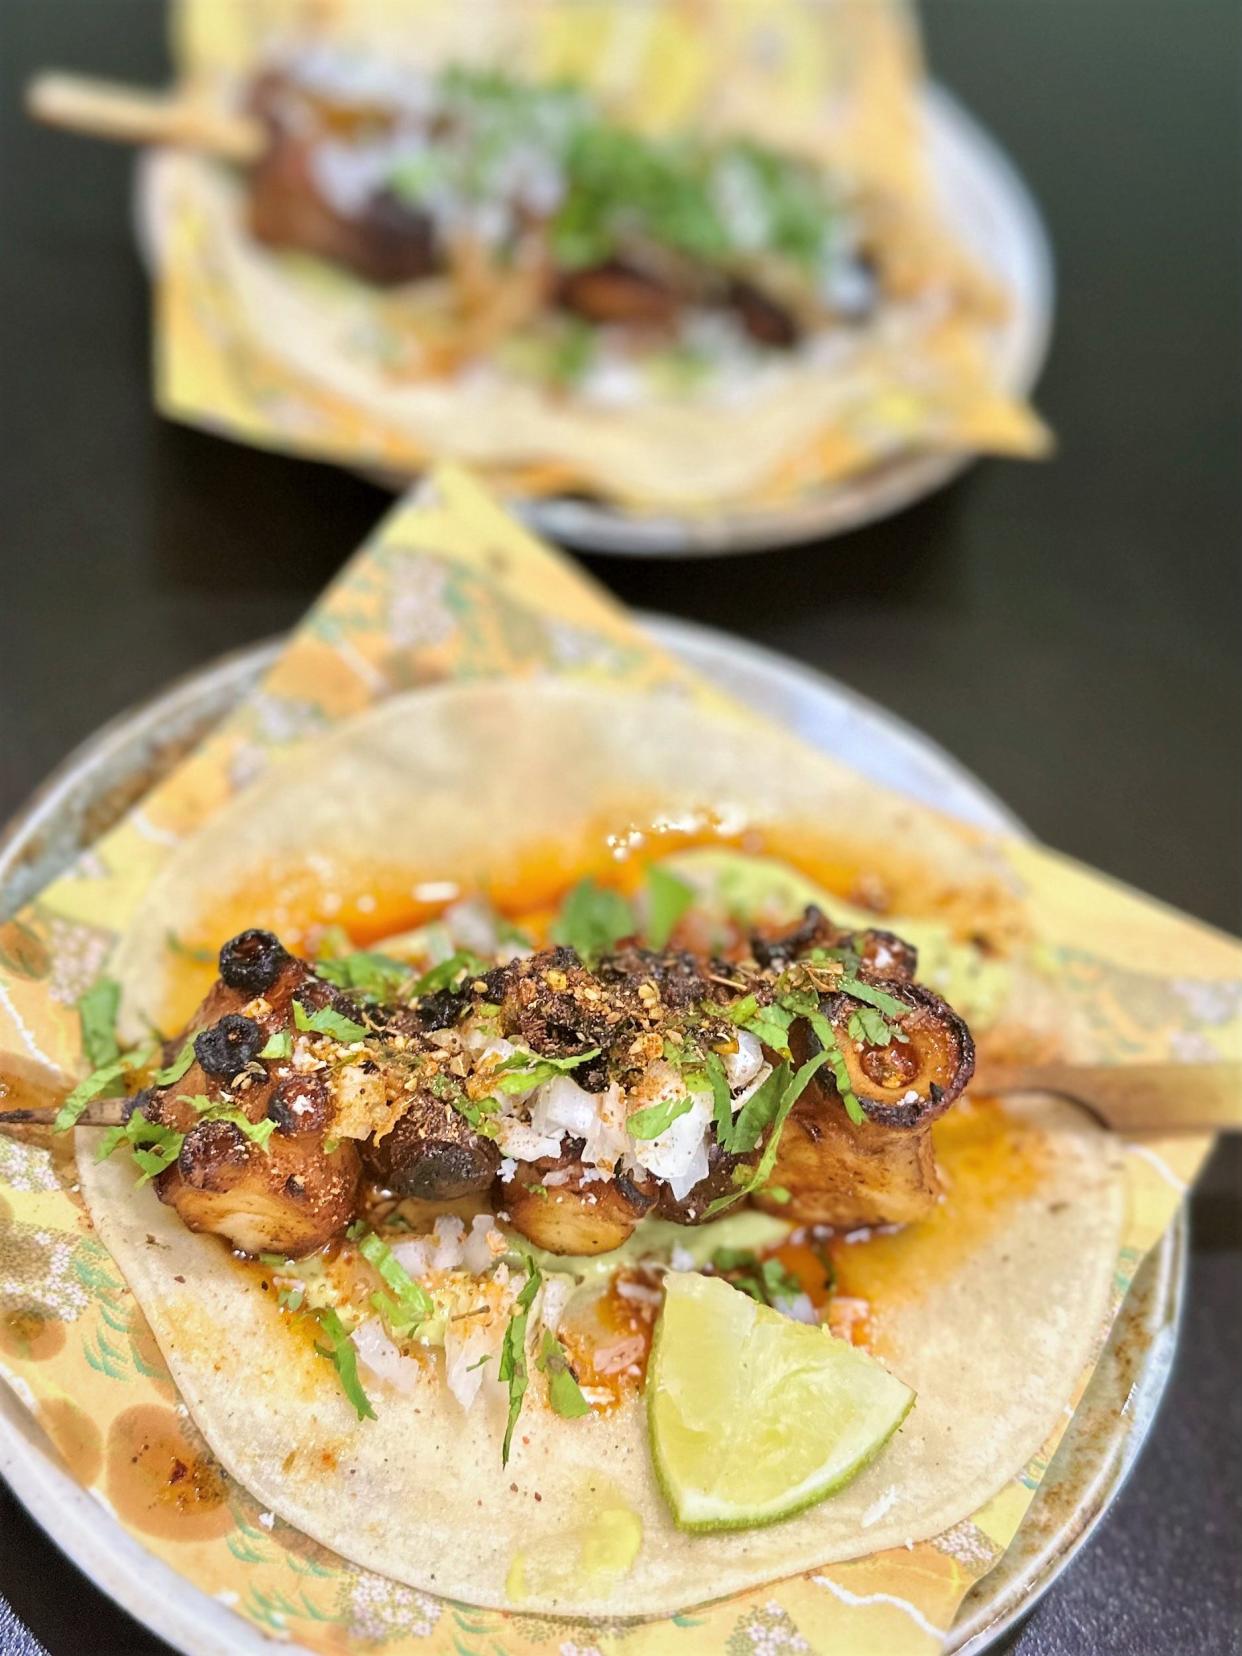 Tacos at Ramen del Barrio come centered with grilled and skewered proteins.